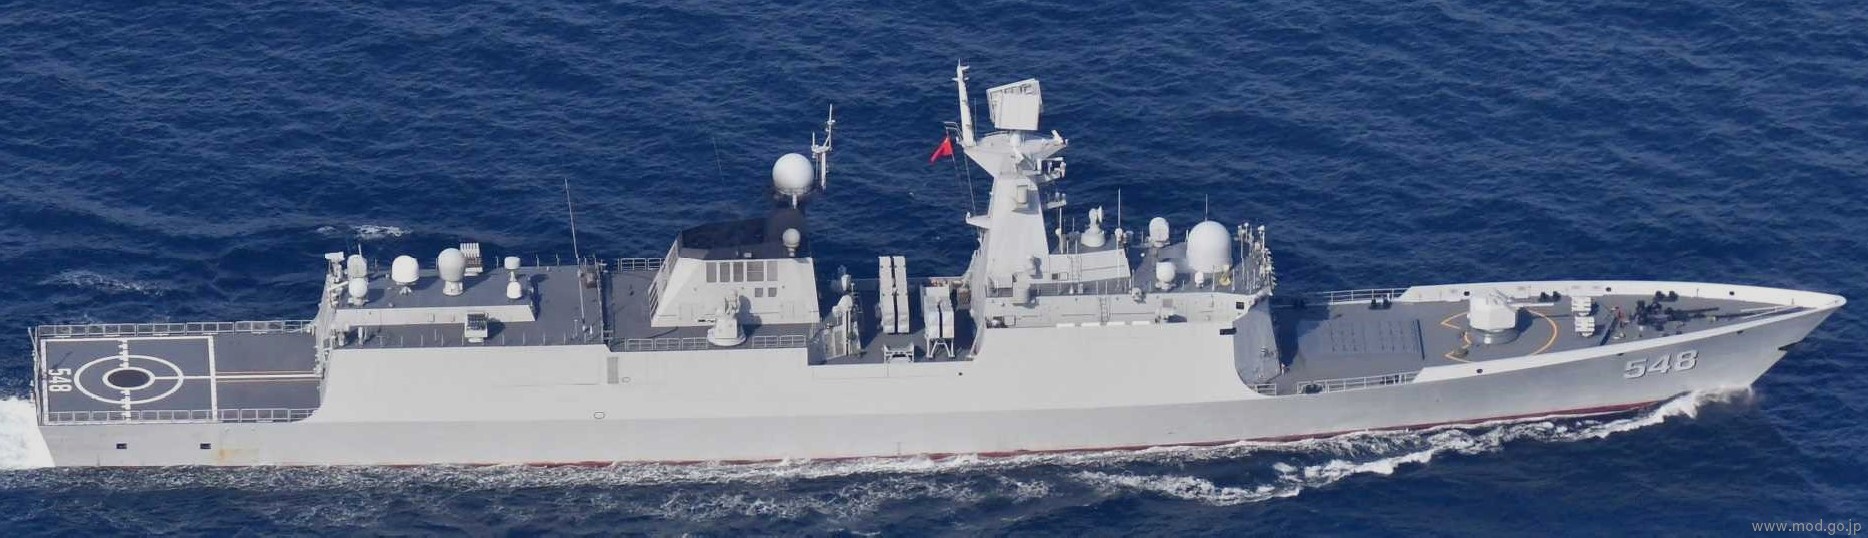 ffg-548 plans yiyang type 054a jiangkai ii class guided missile frigate china people's liberation army navy 03